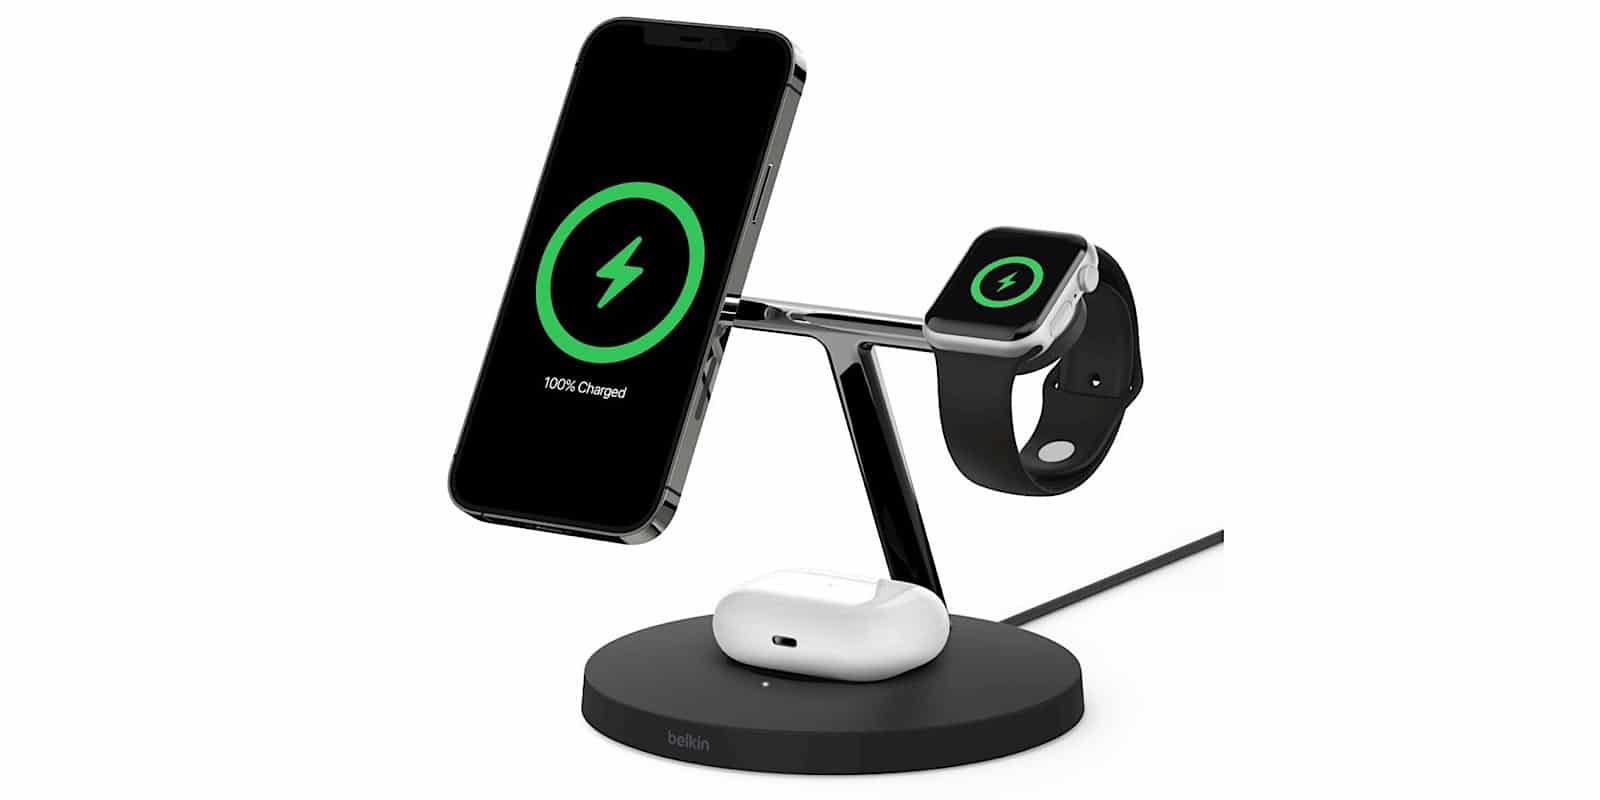 Belkin's MagSafe Boost Charge Pro stand